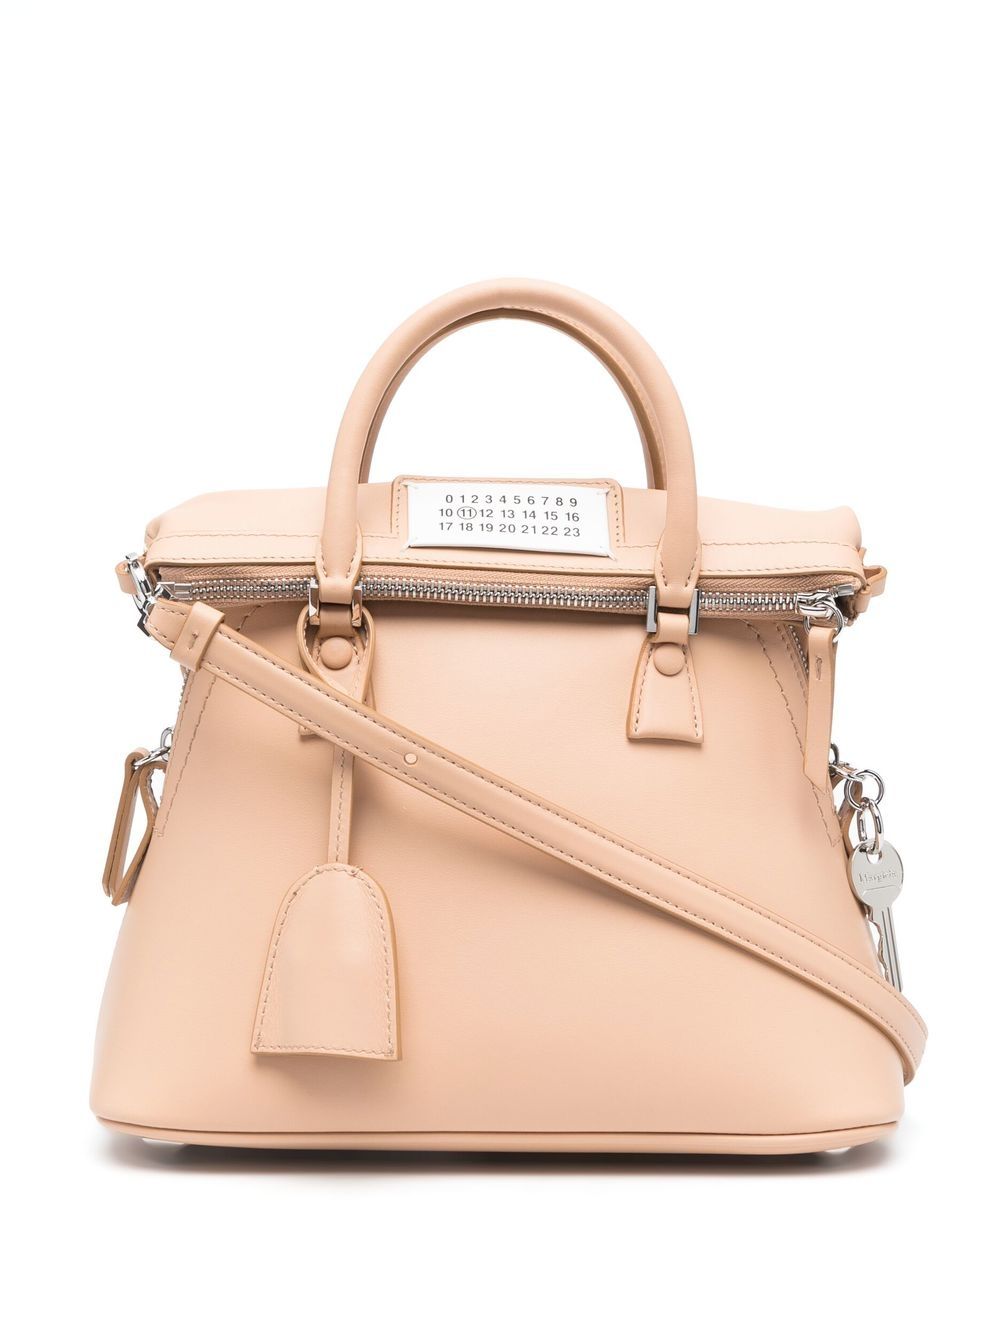 Blush Leather Tote for the Fashion-Savvy